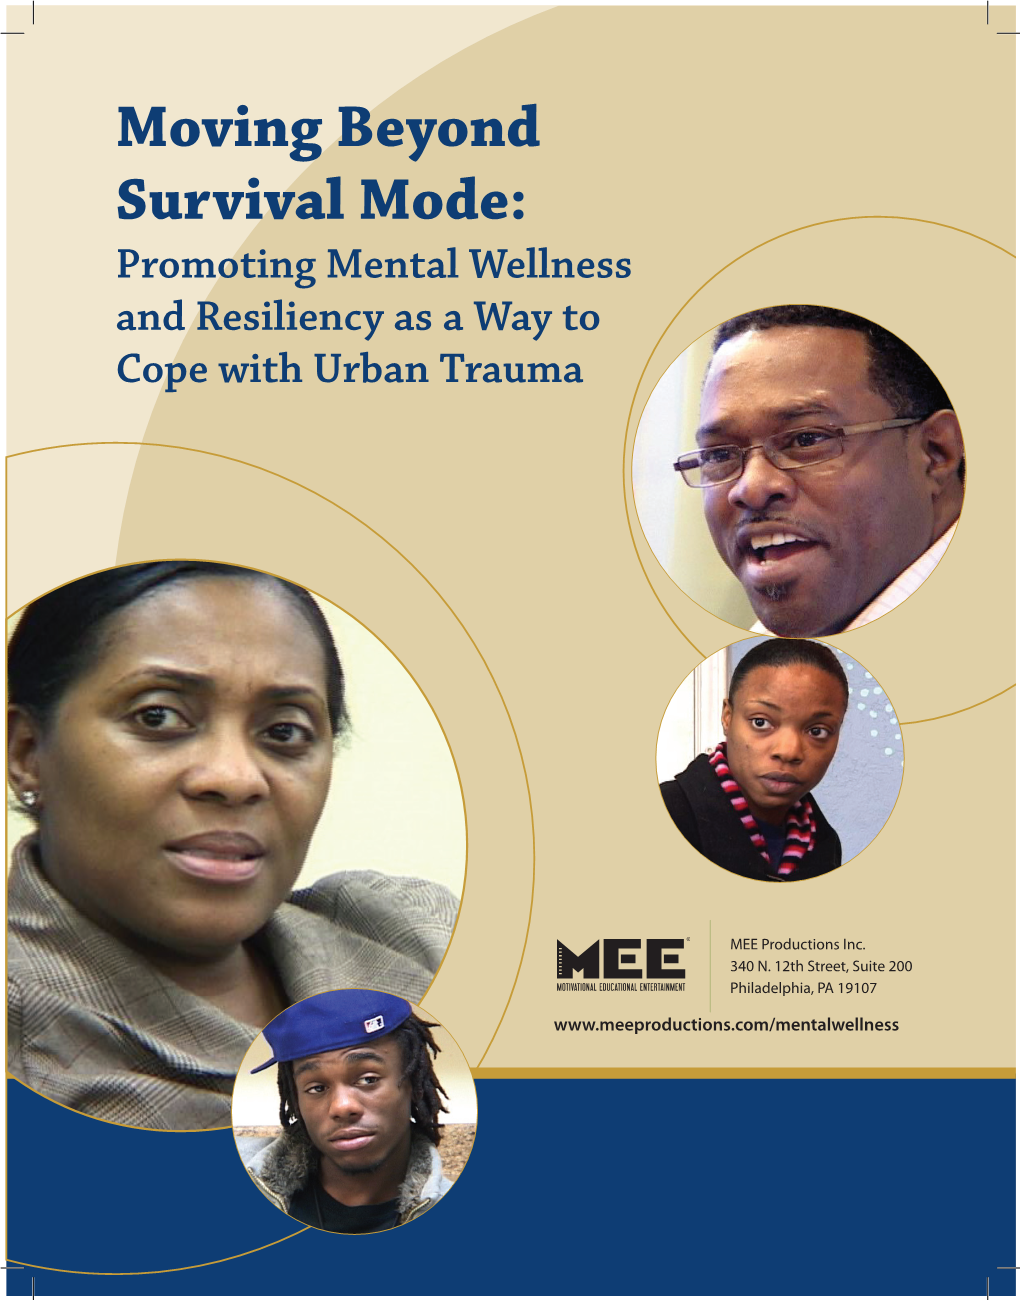 “Moving Beyond Survival Mode” Report